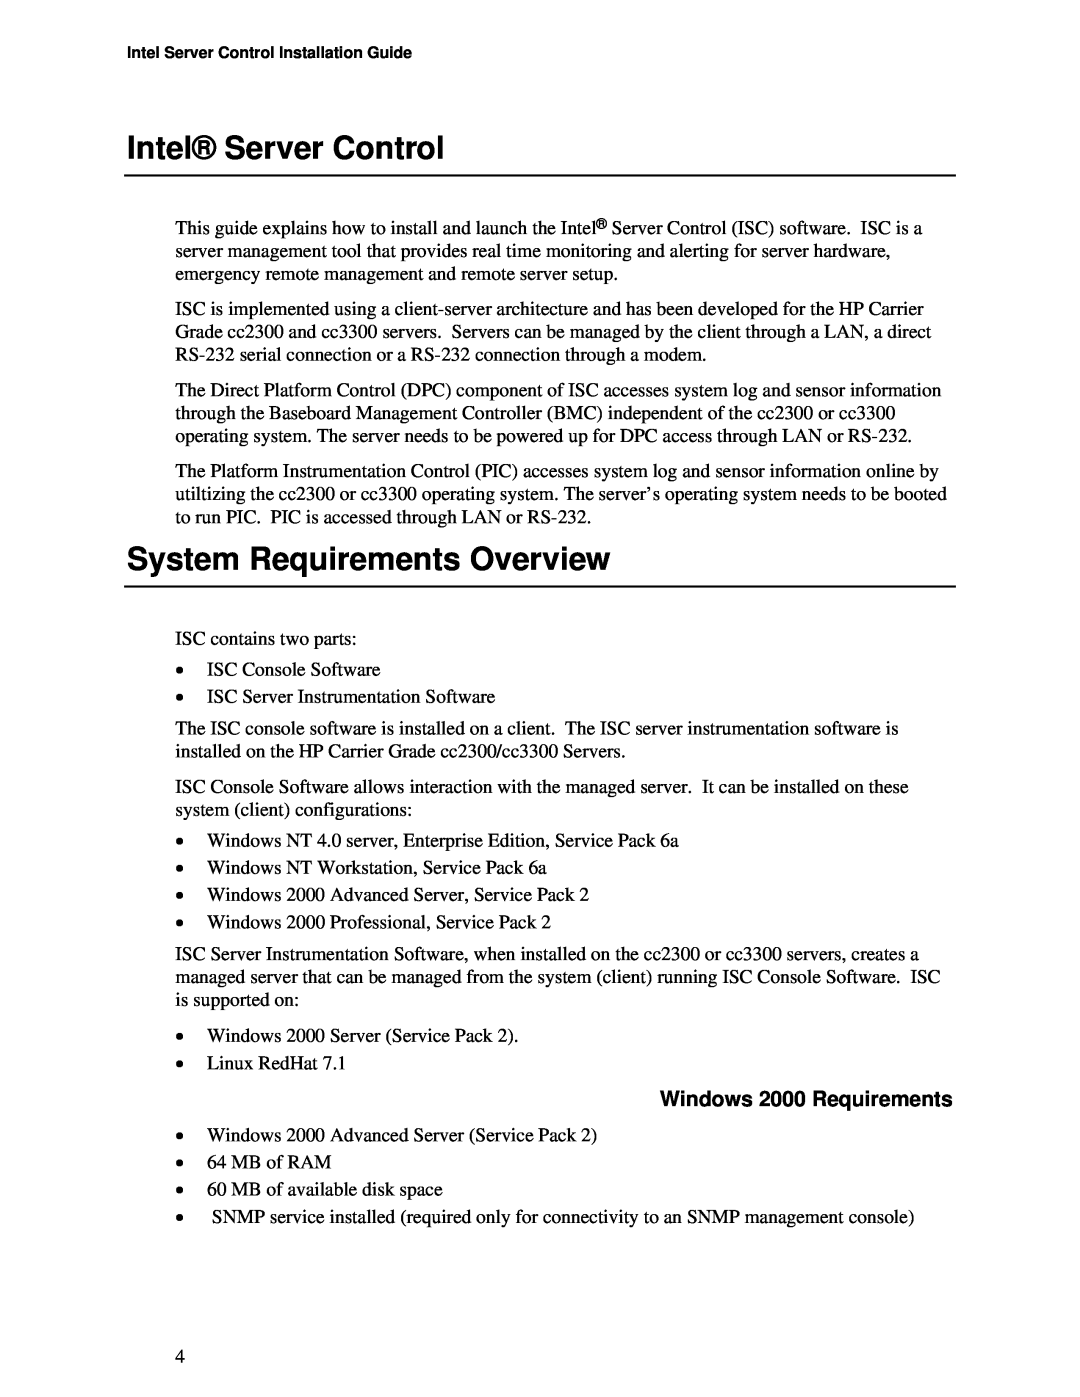 Intel cc3300, cc2300 manual Intel Server Control, System Requirements Overview, Windows 2000 Requirements 